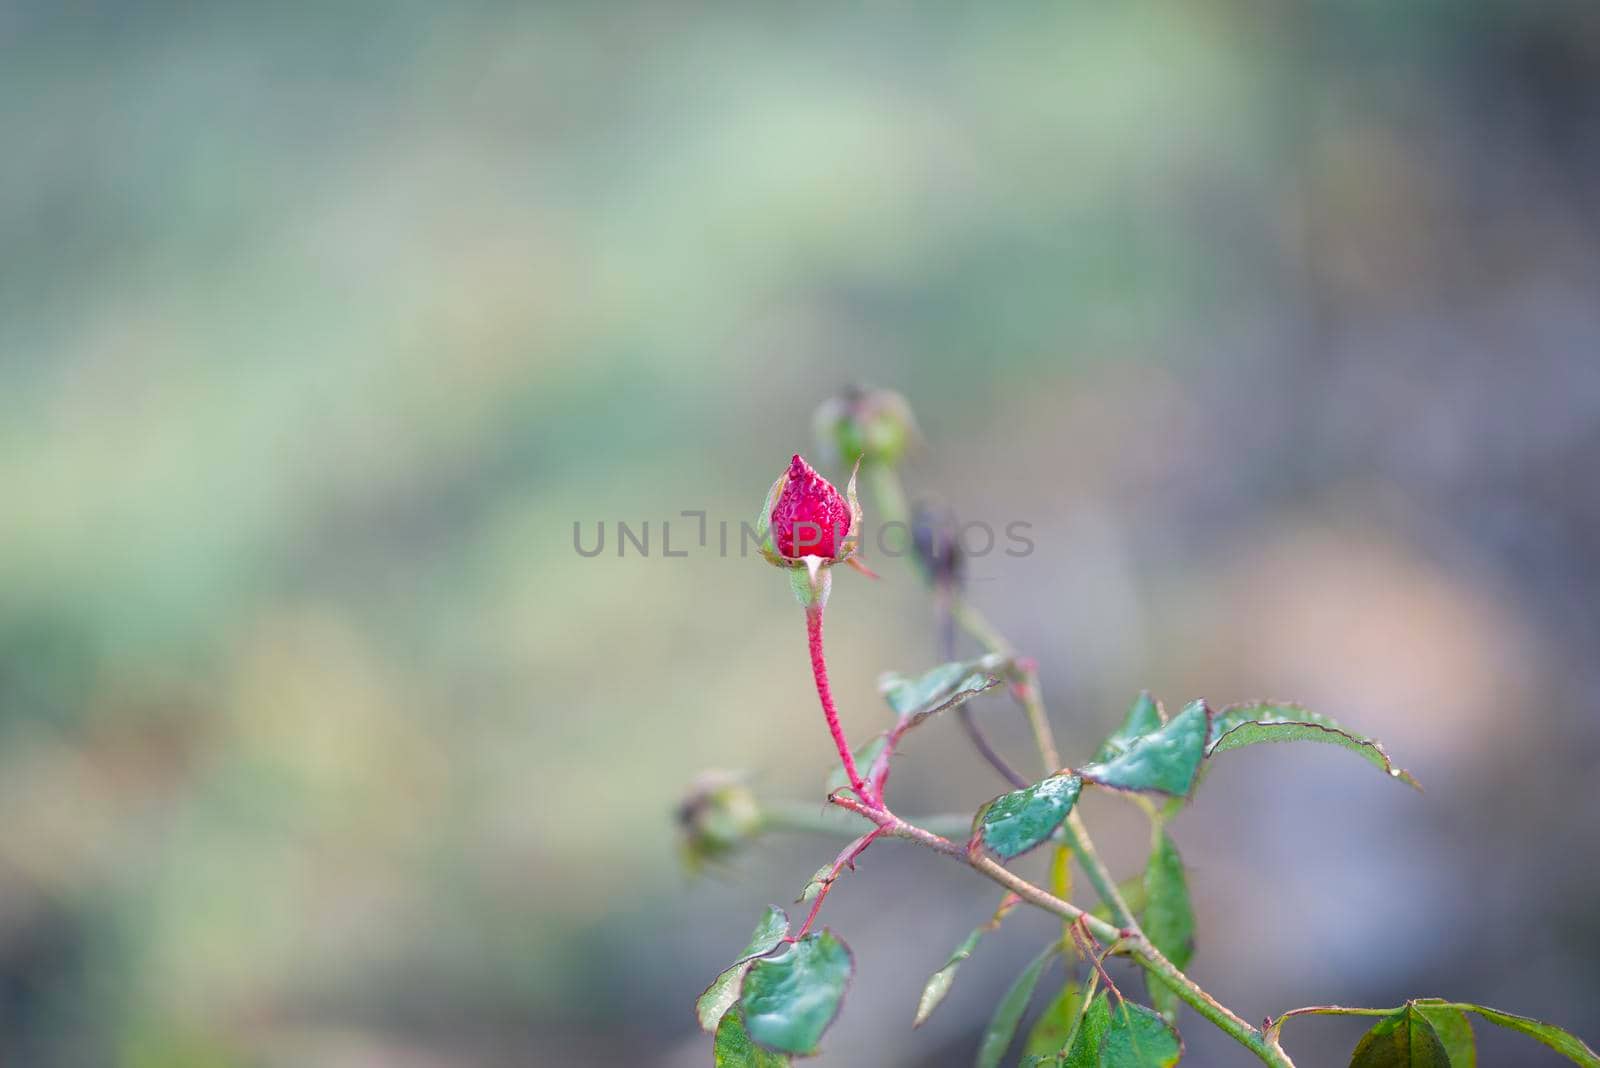 Closeup of a Rosebud in a garden, Red Rose Bud rowing on a bush with greenery in the background. by shaadjutt36